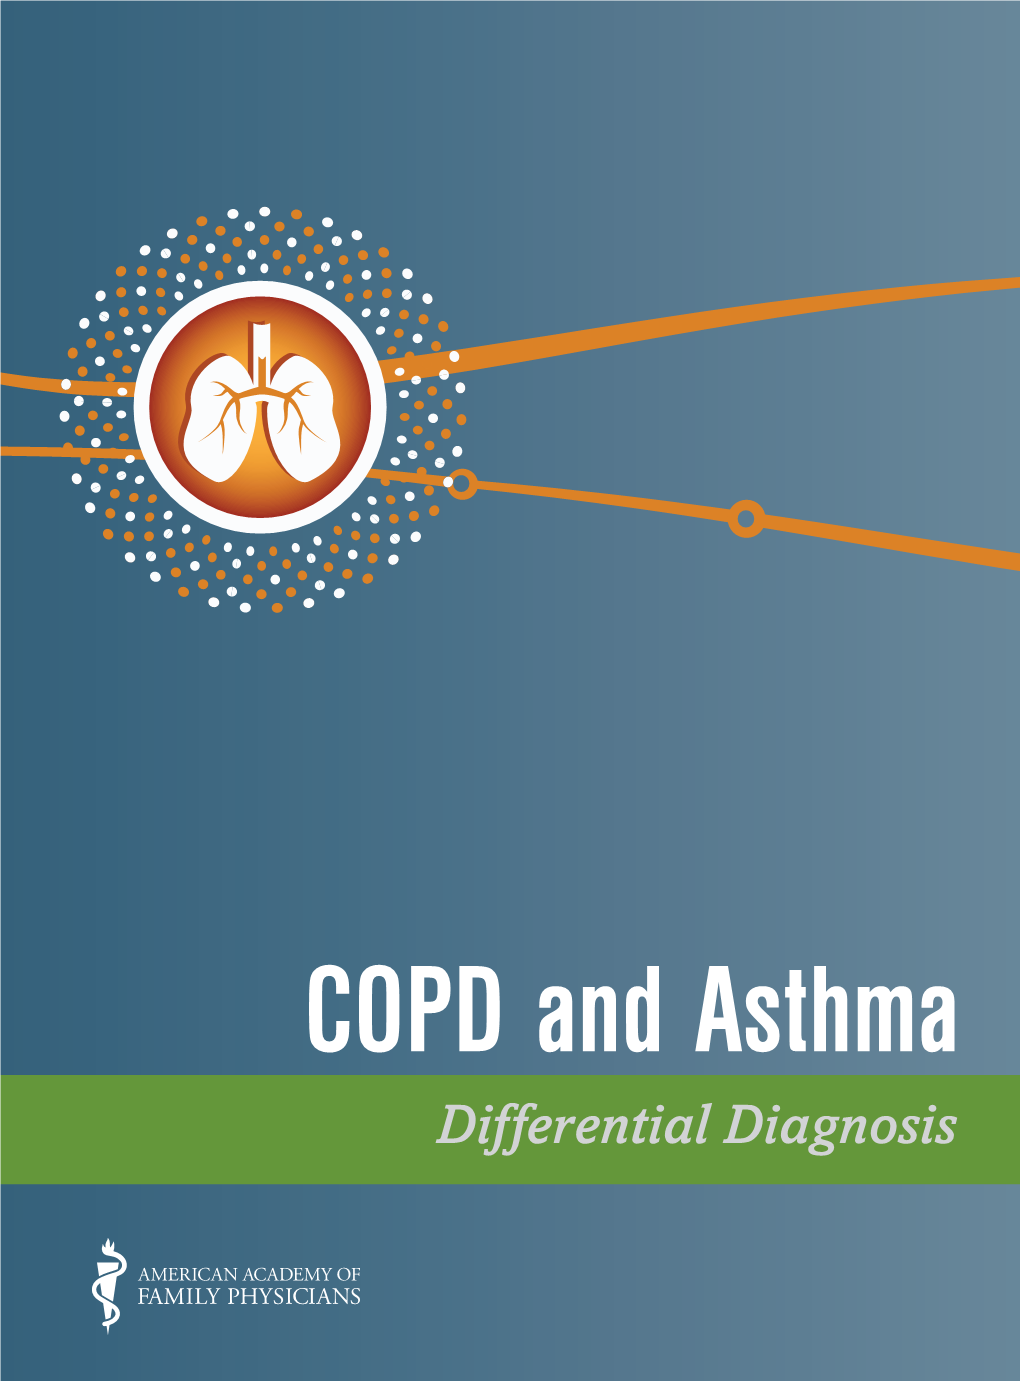 COPD and Asthma: Differential Diagnosis Is Available At